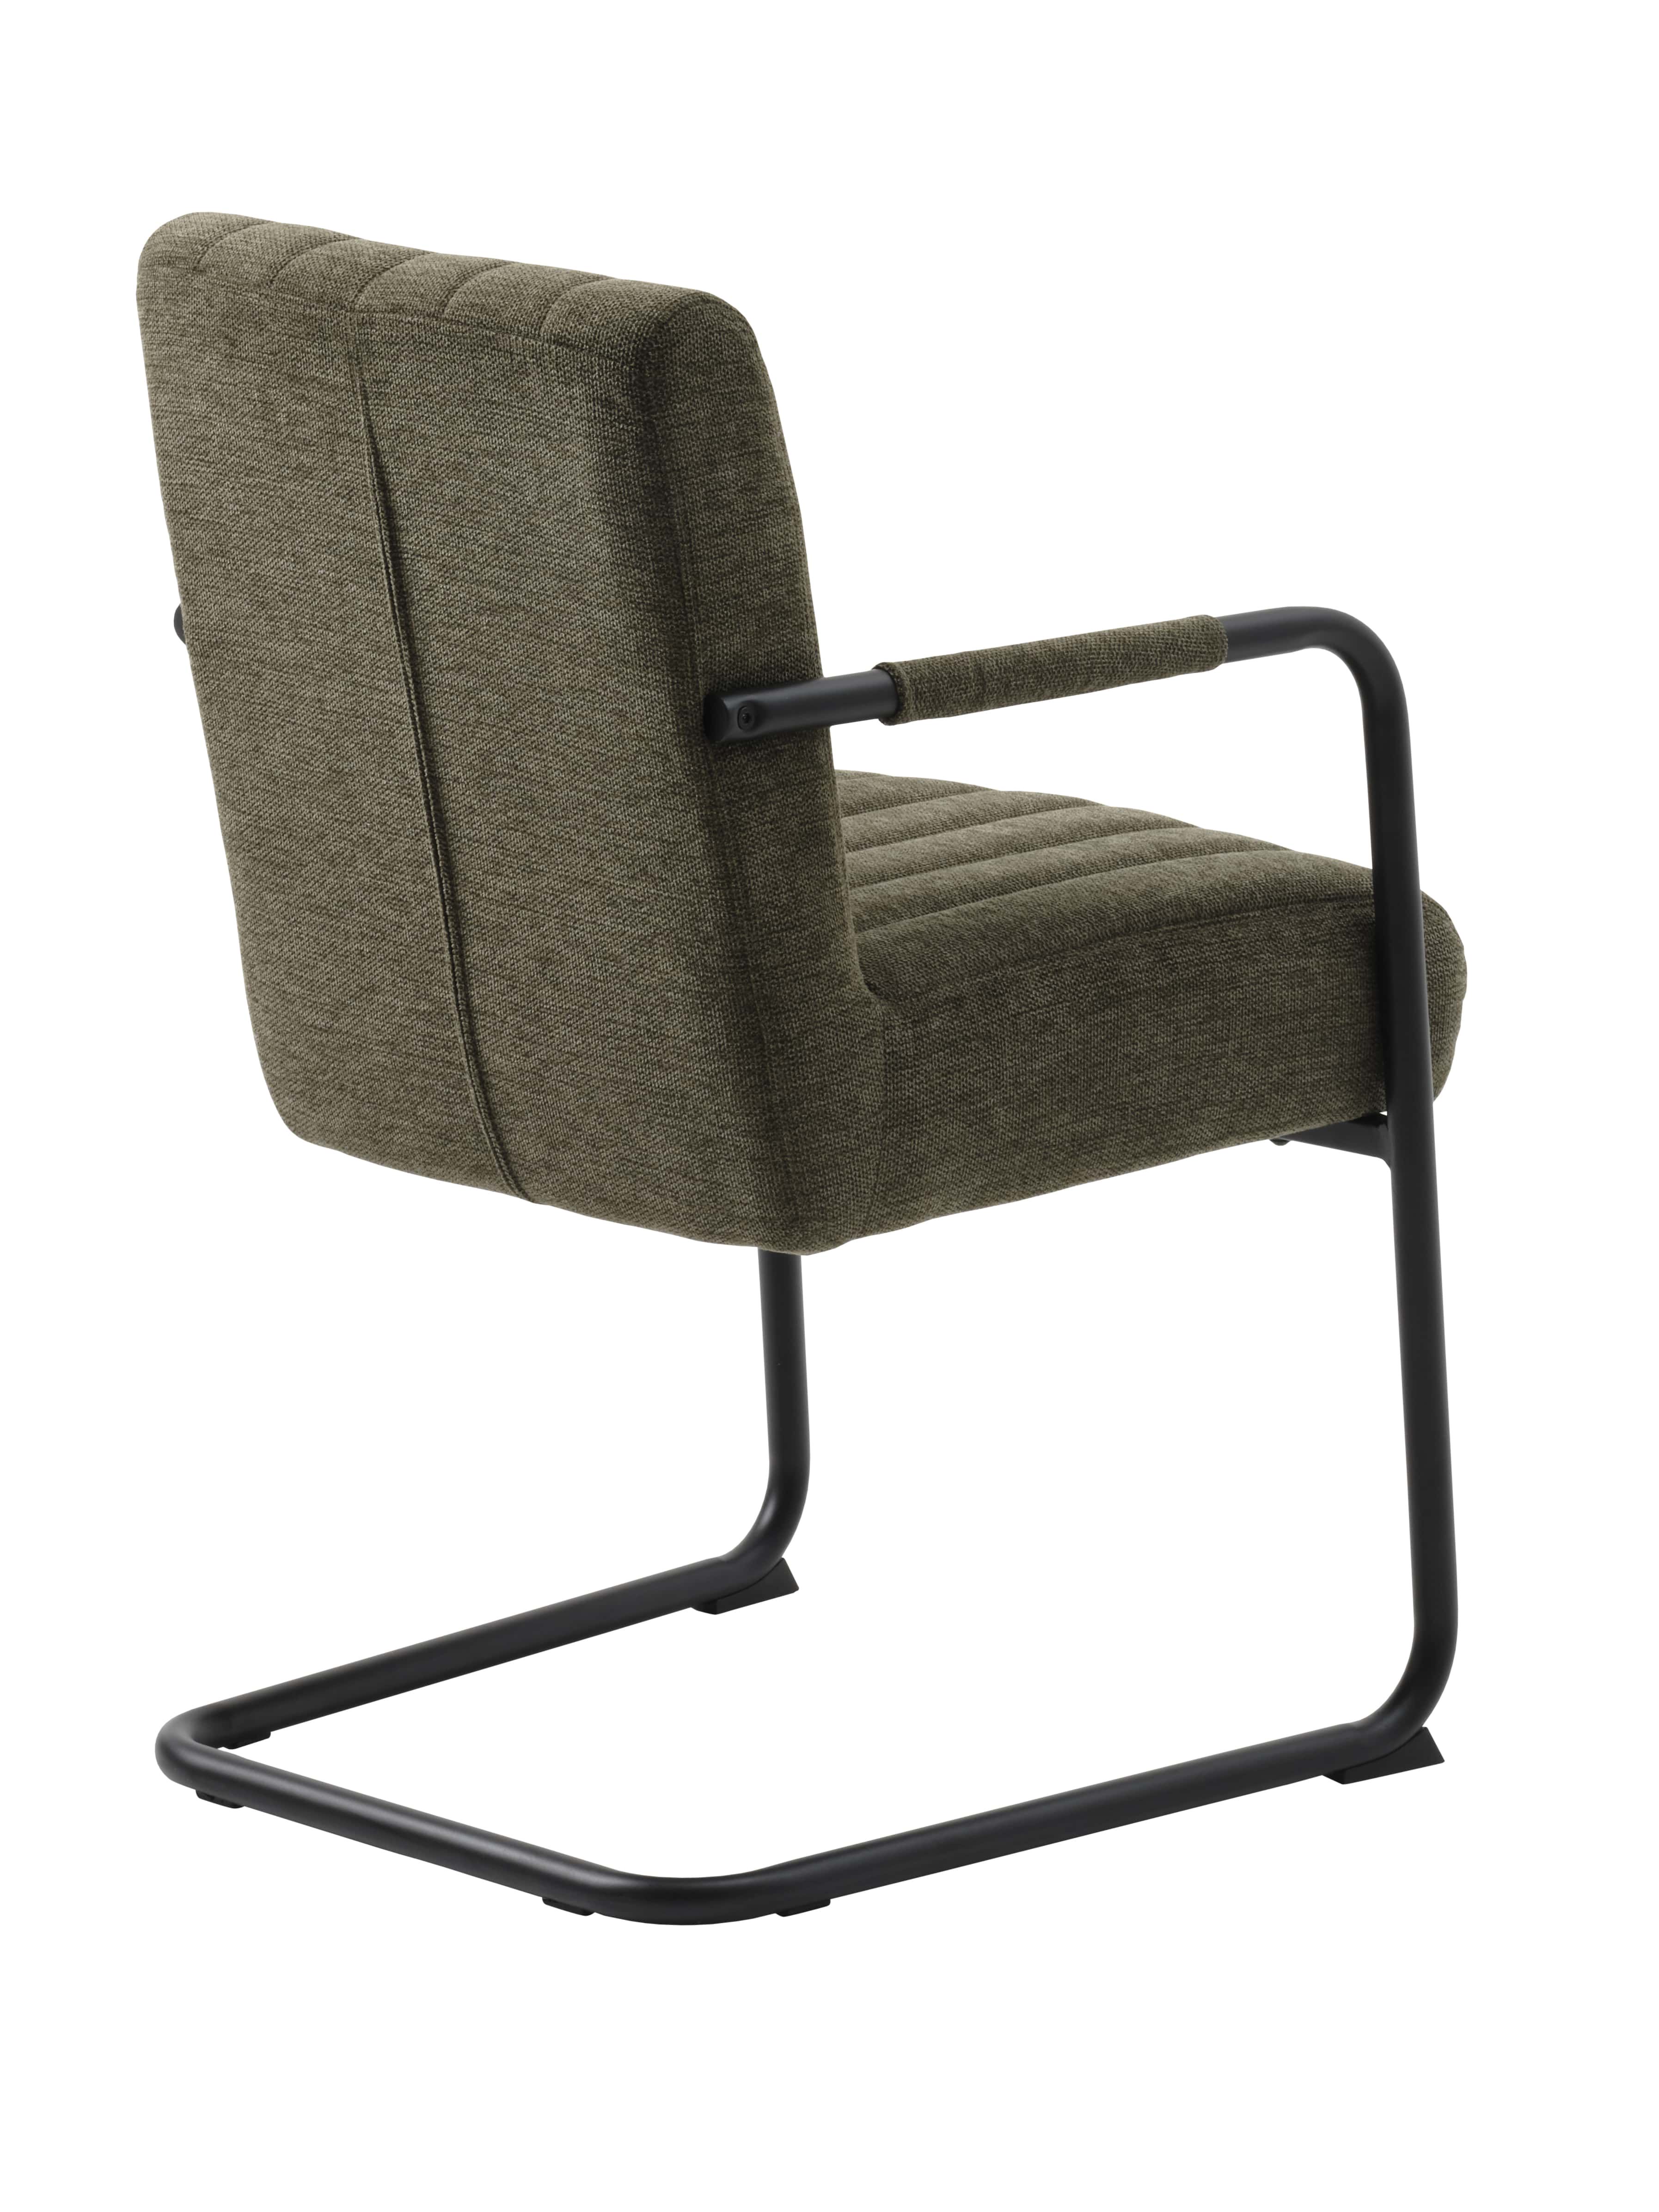 49490003 TROUT CHAIR OLIVE GREEN_4-min.jpg